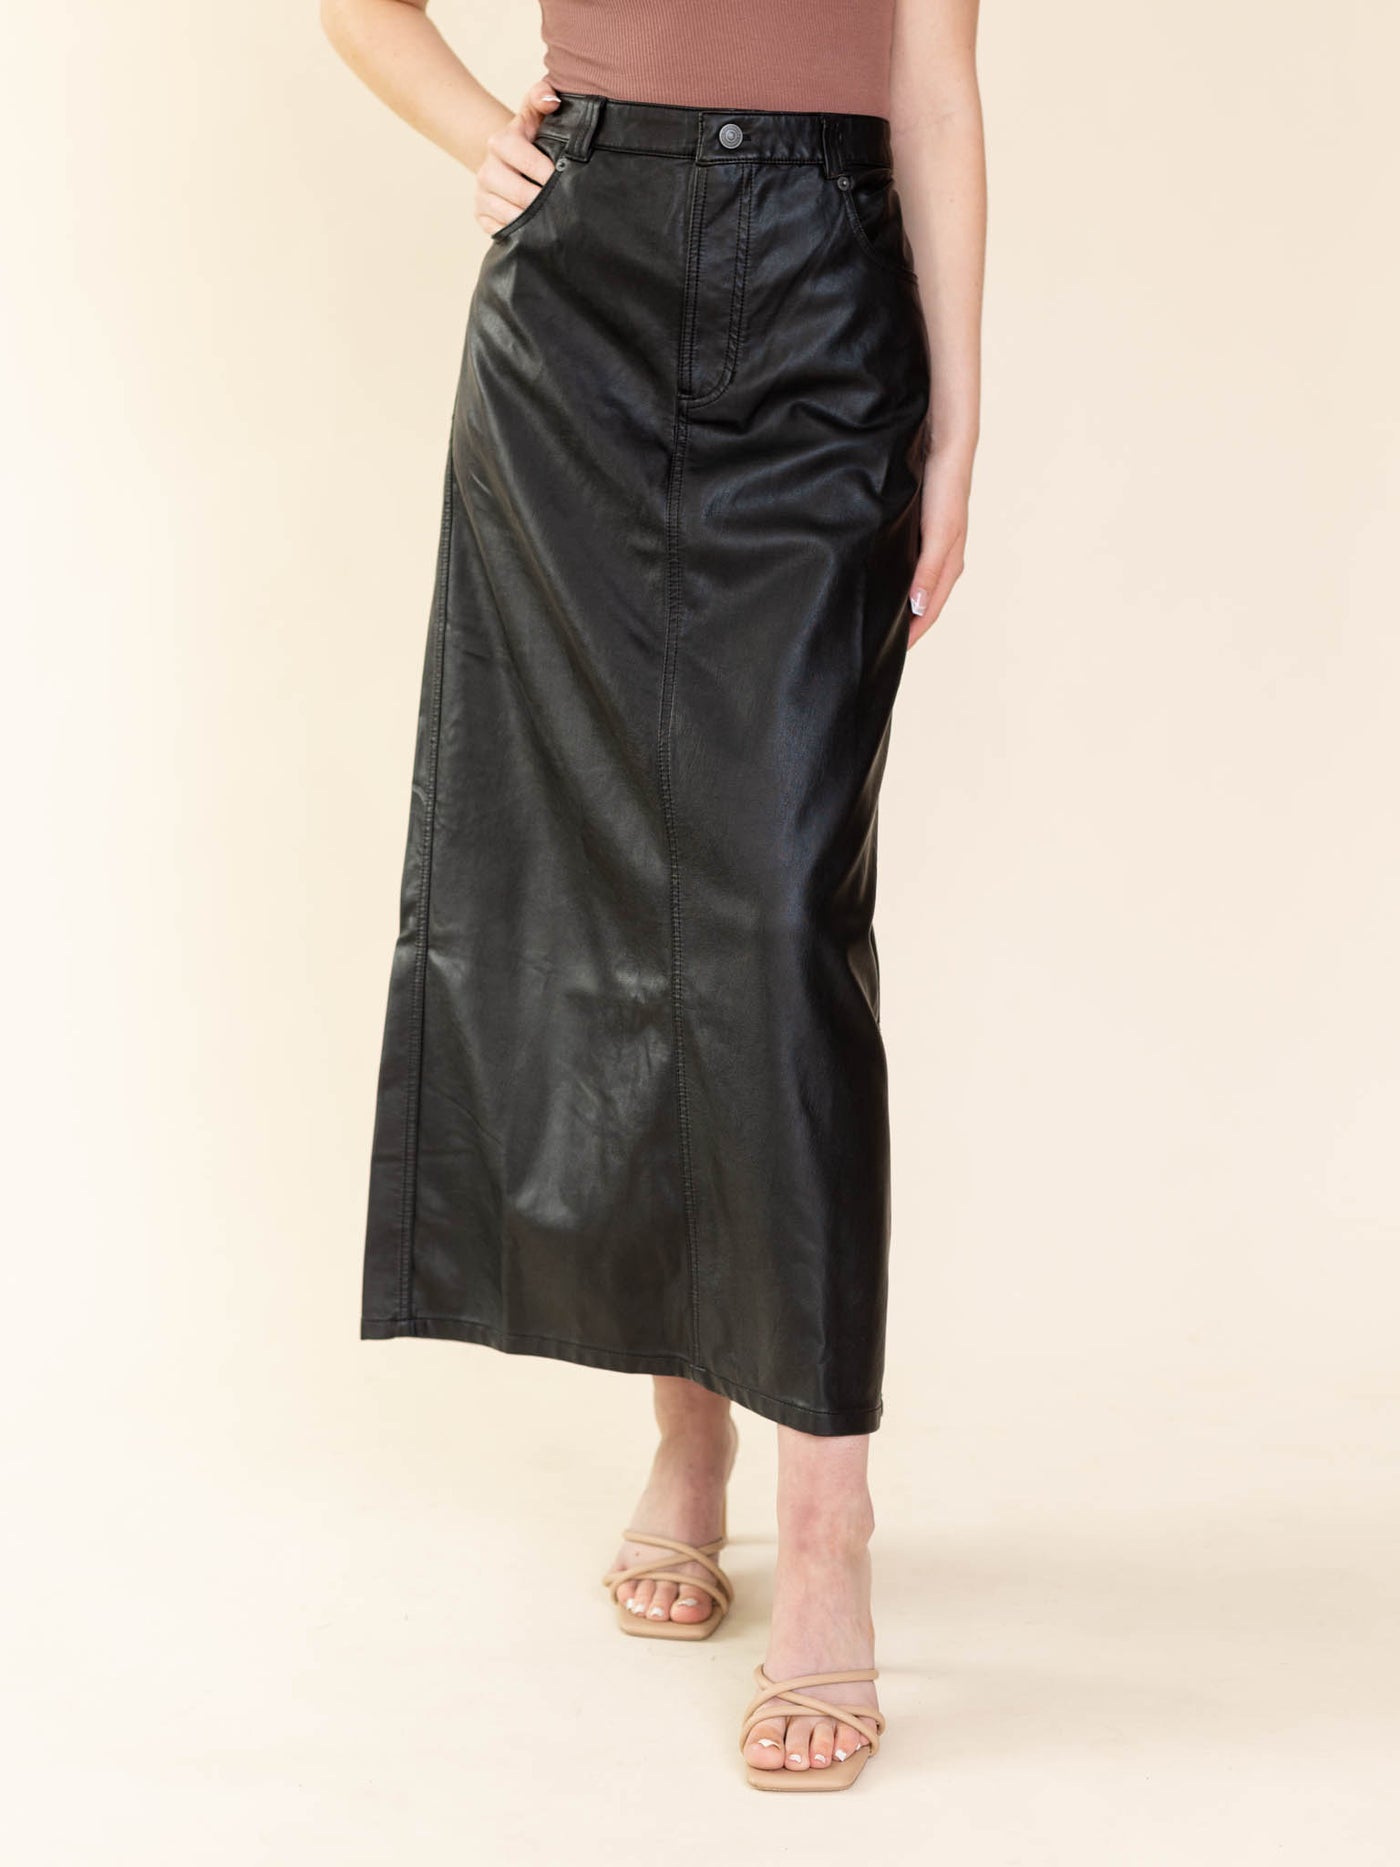 black faux leather skirt